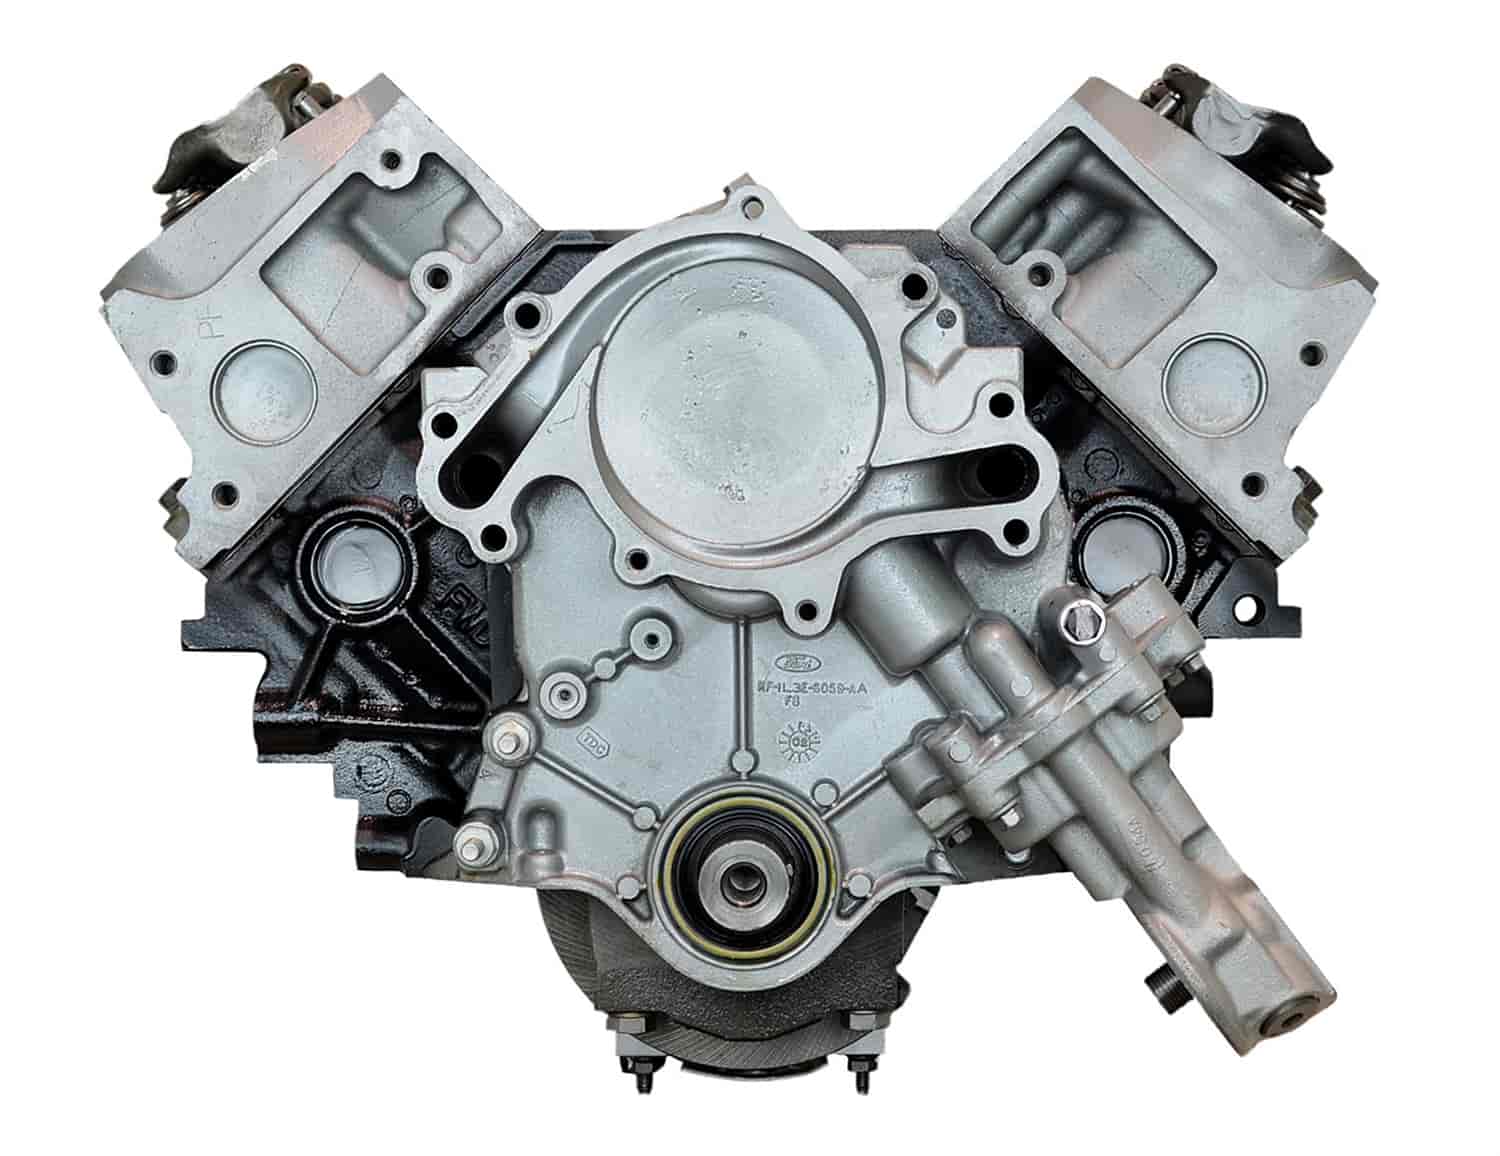 Remanufactured Crate Engine for 2001-2003 Ford Aerostar with 3.8L V6